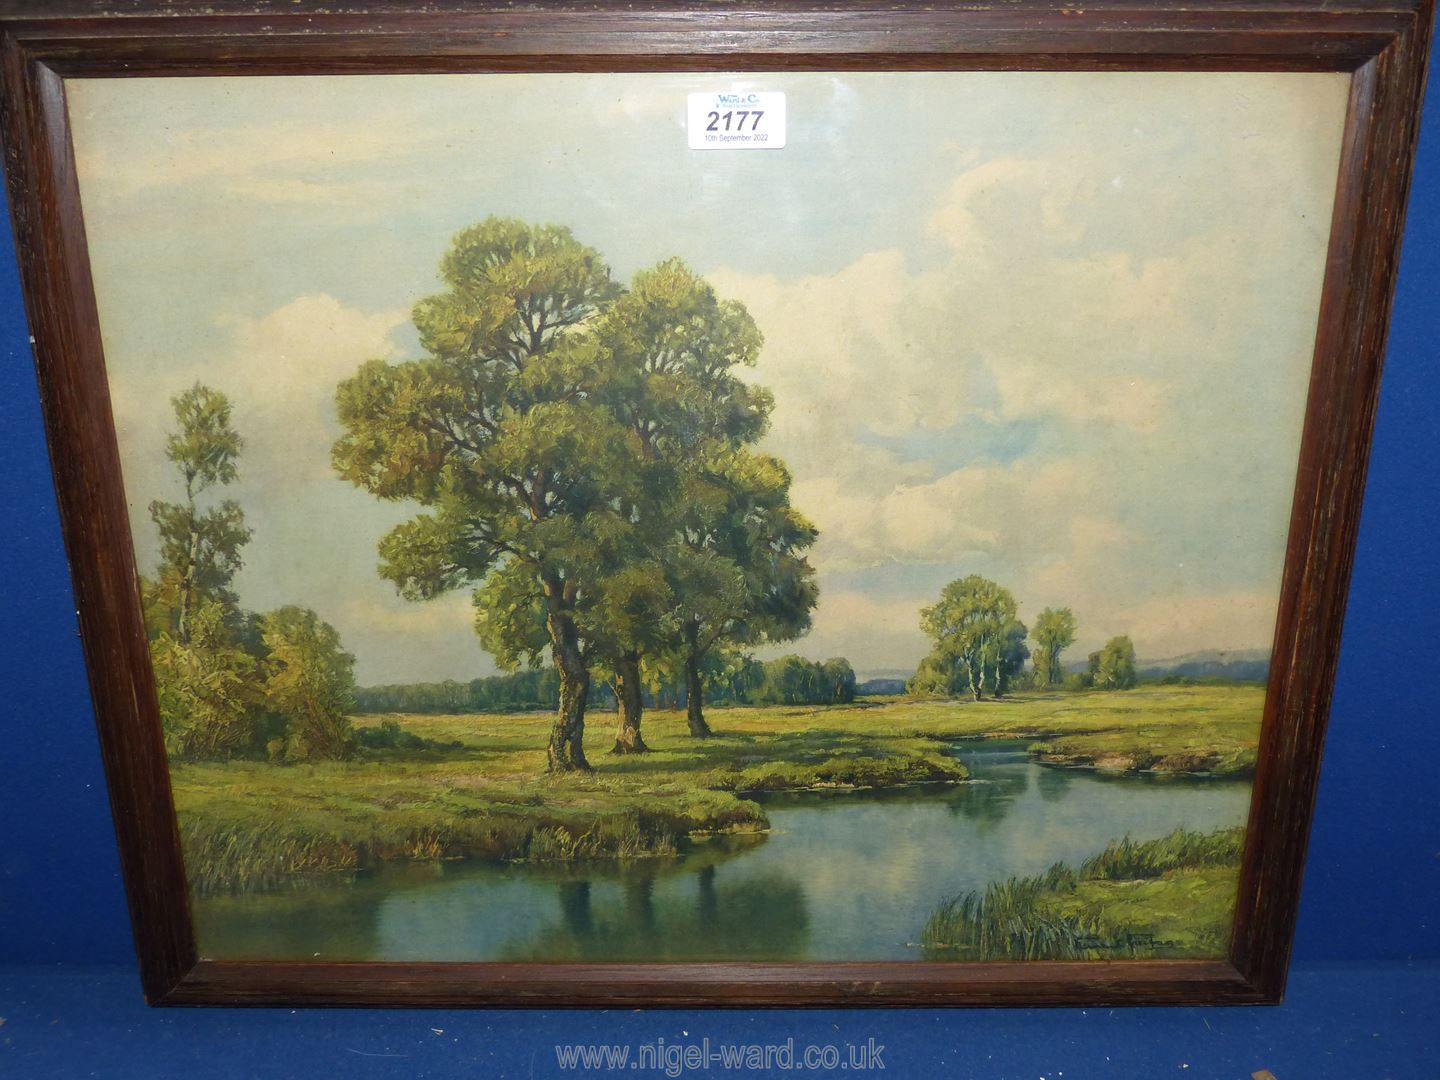 A wooden framed print depicting a river scene with fields, trees and rolling hills in the distance,